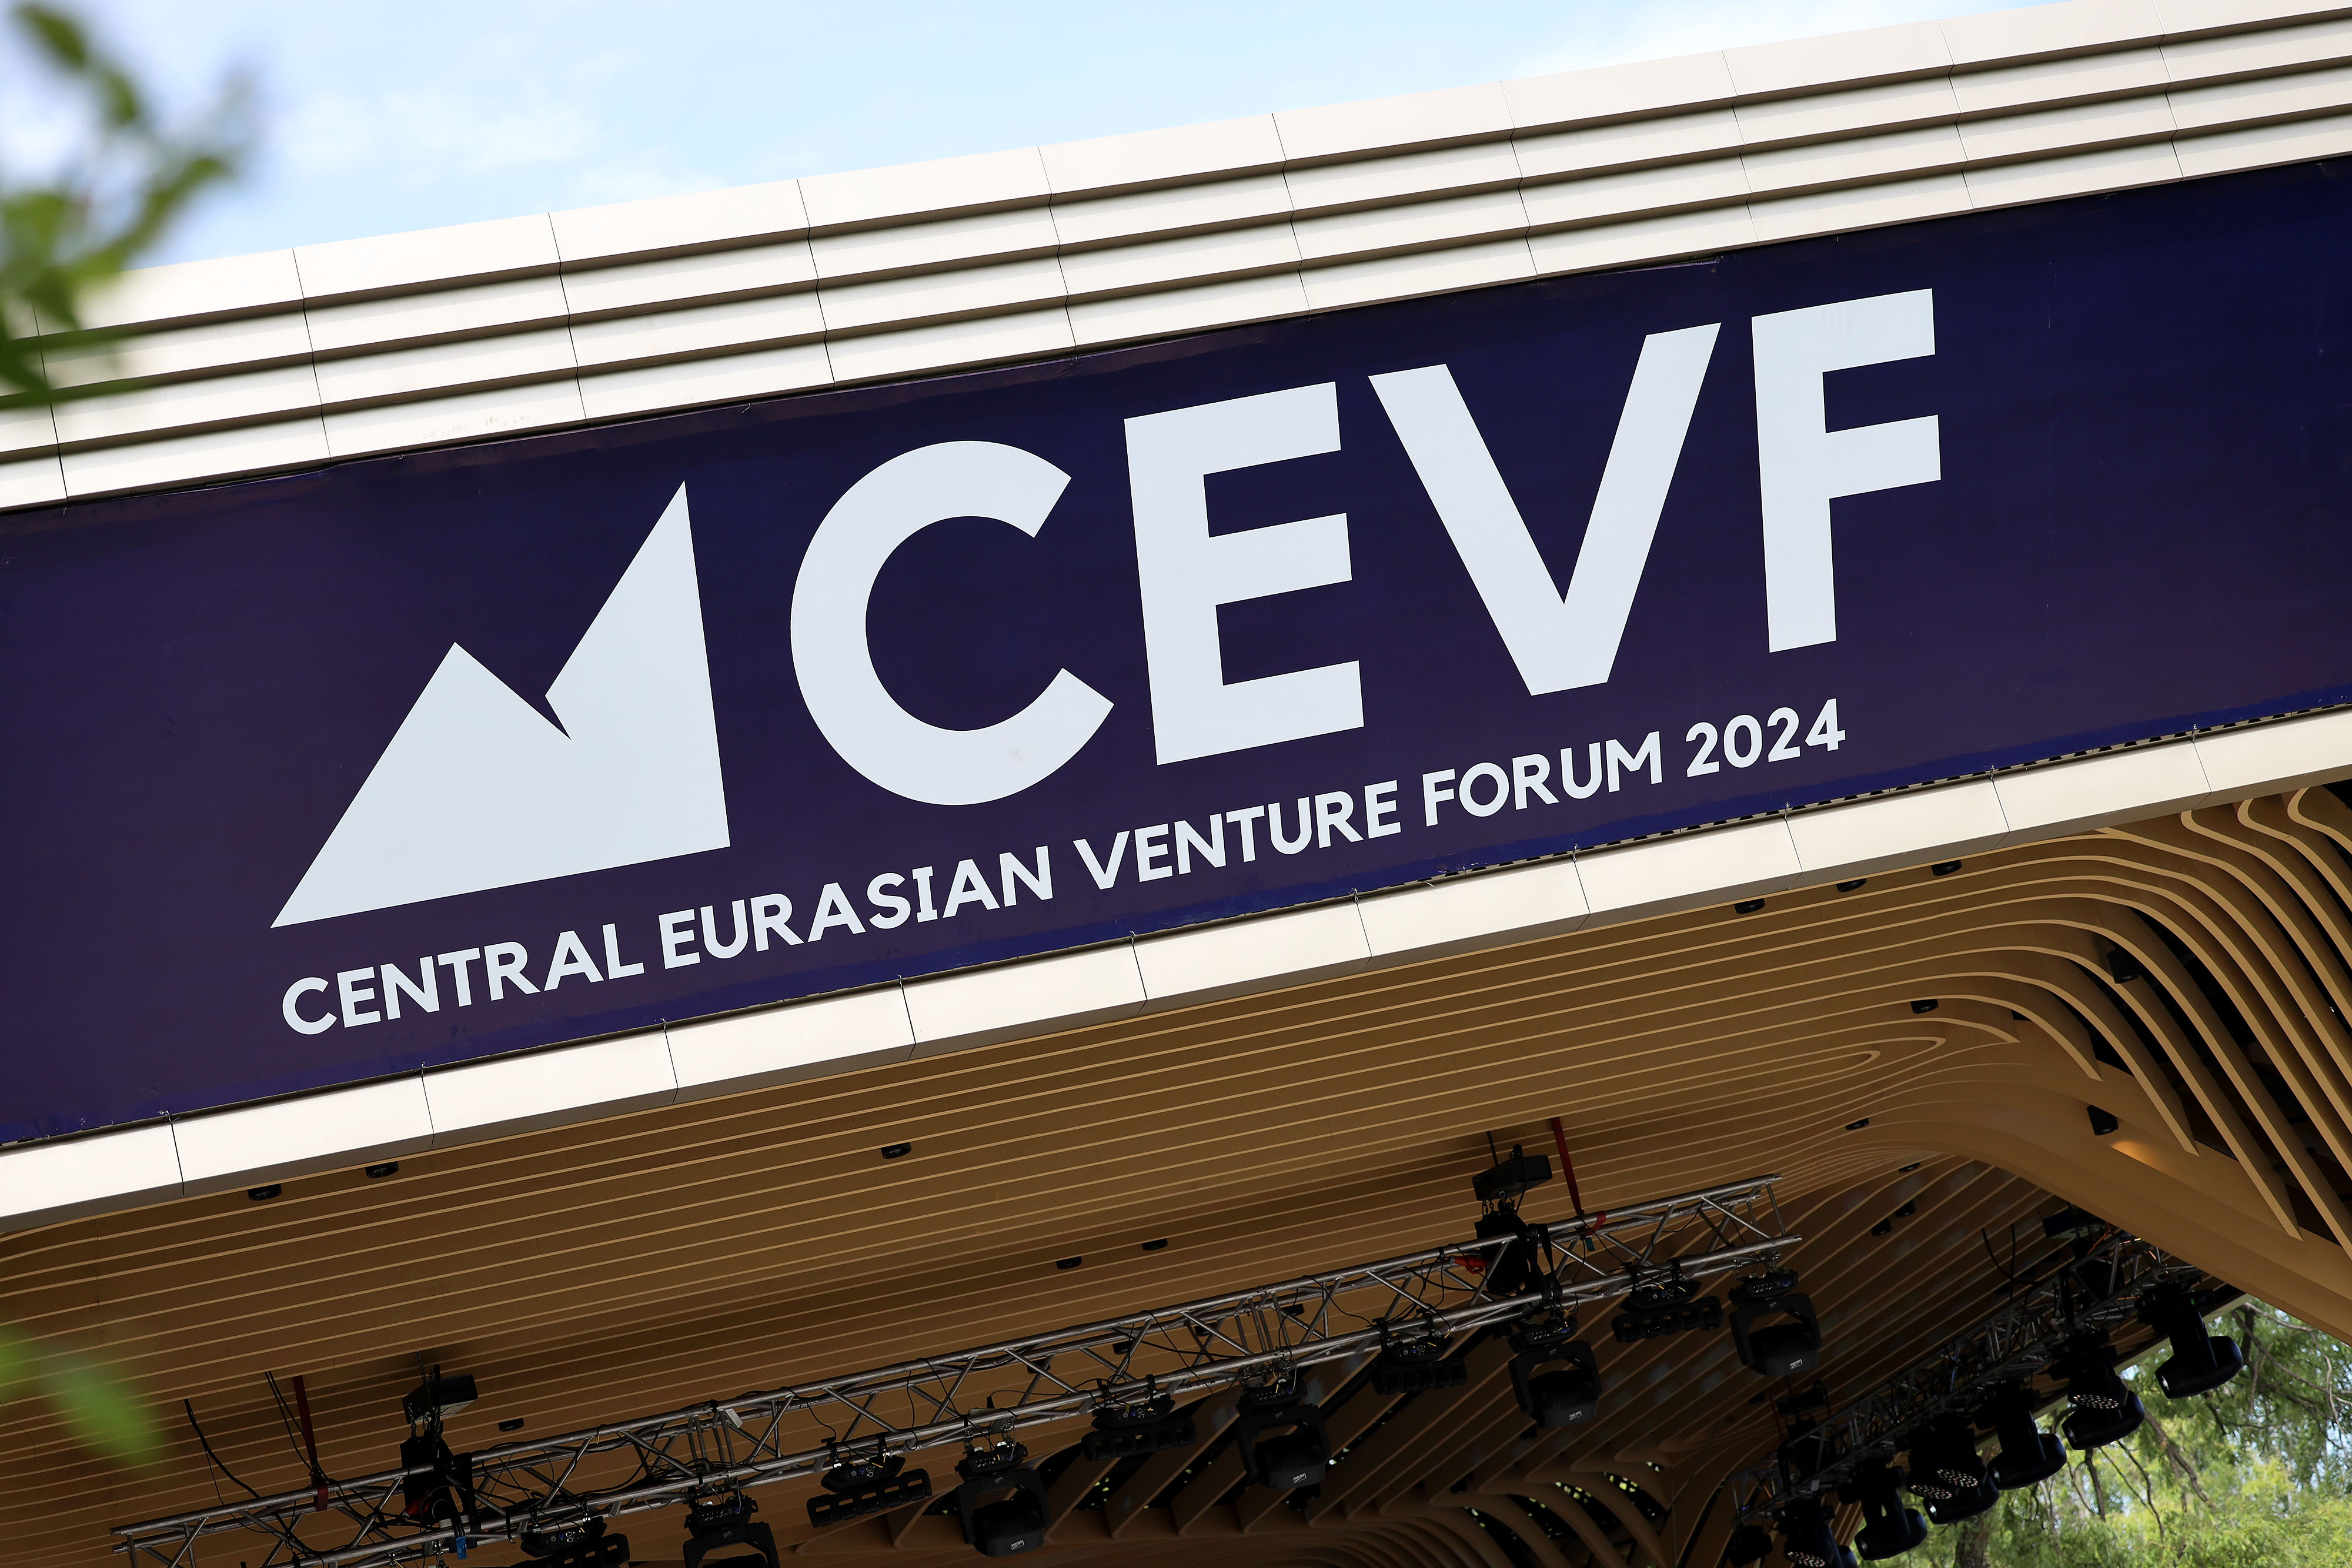 Qazaqstan Investment Corporation participated  at the Central Eurasian Venture Forum 2024